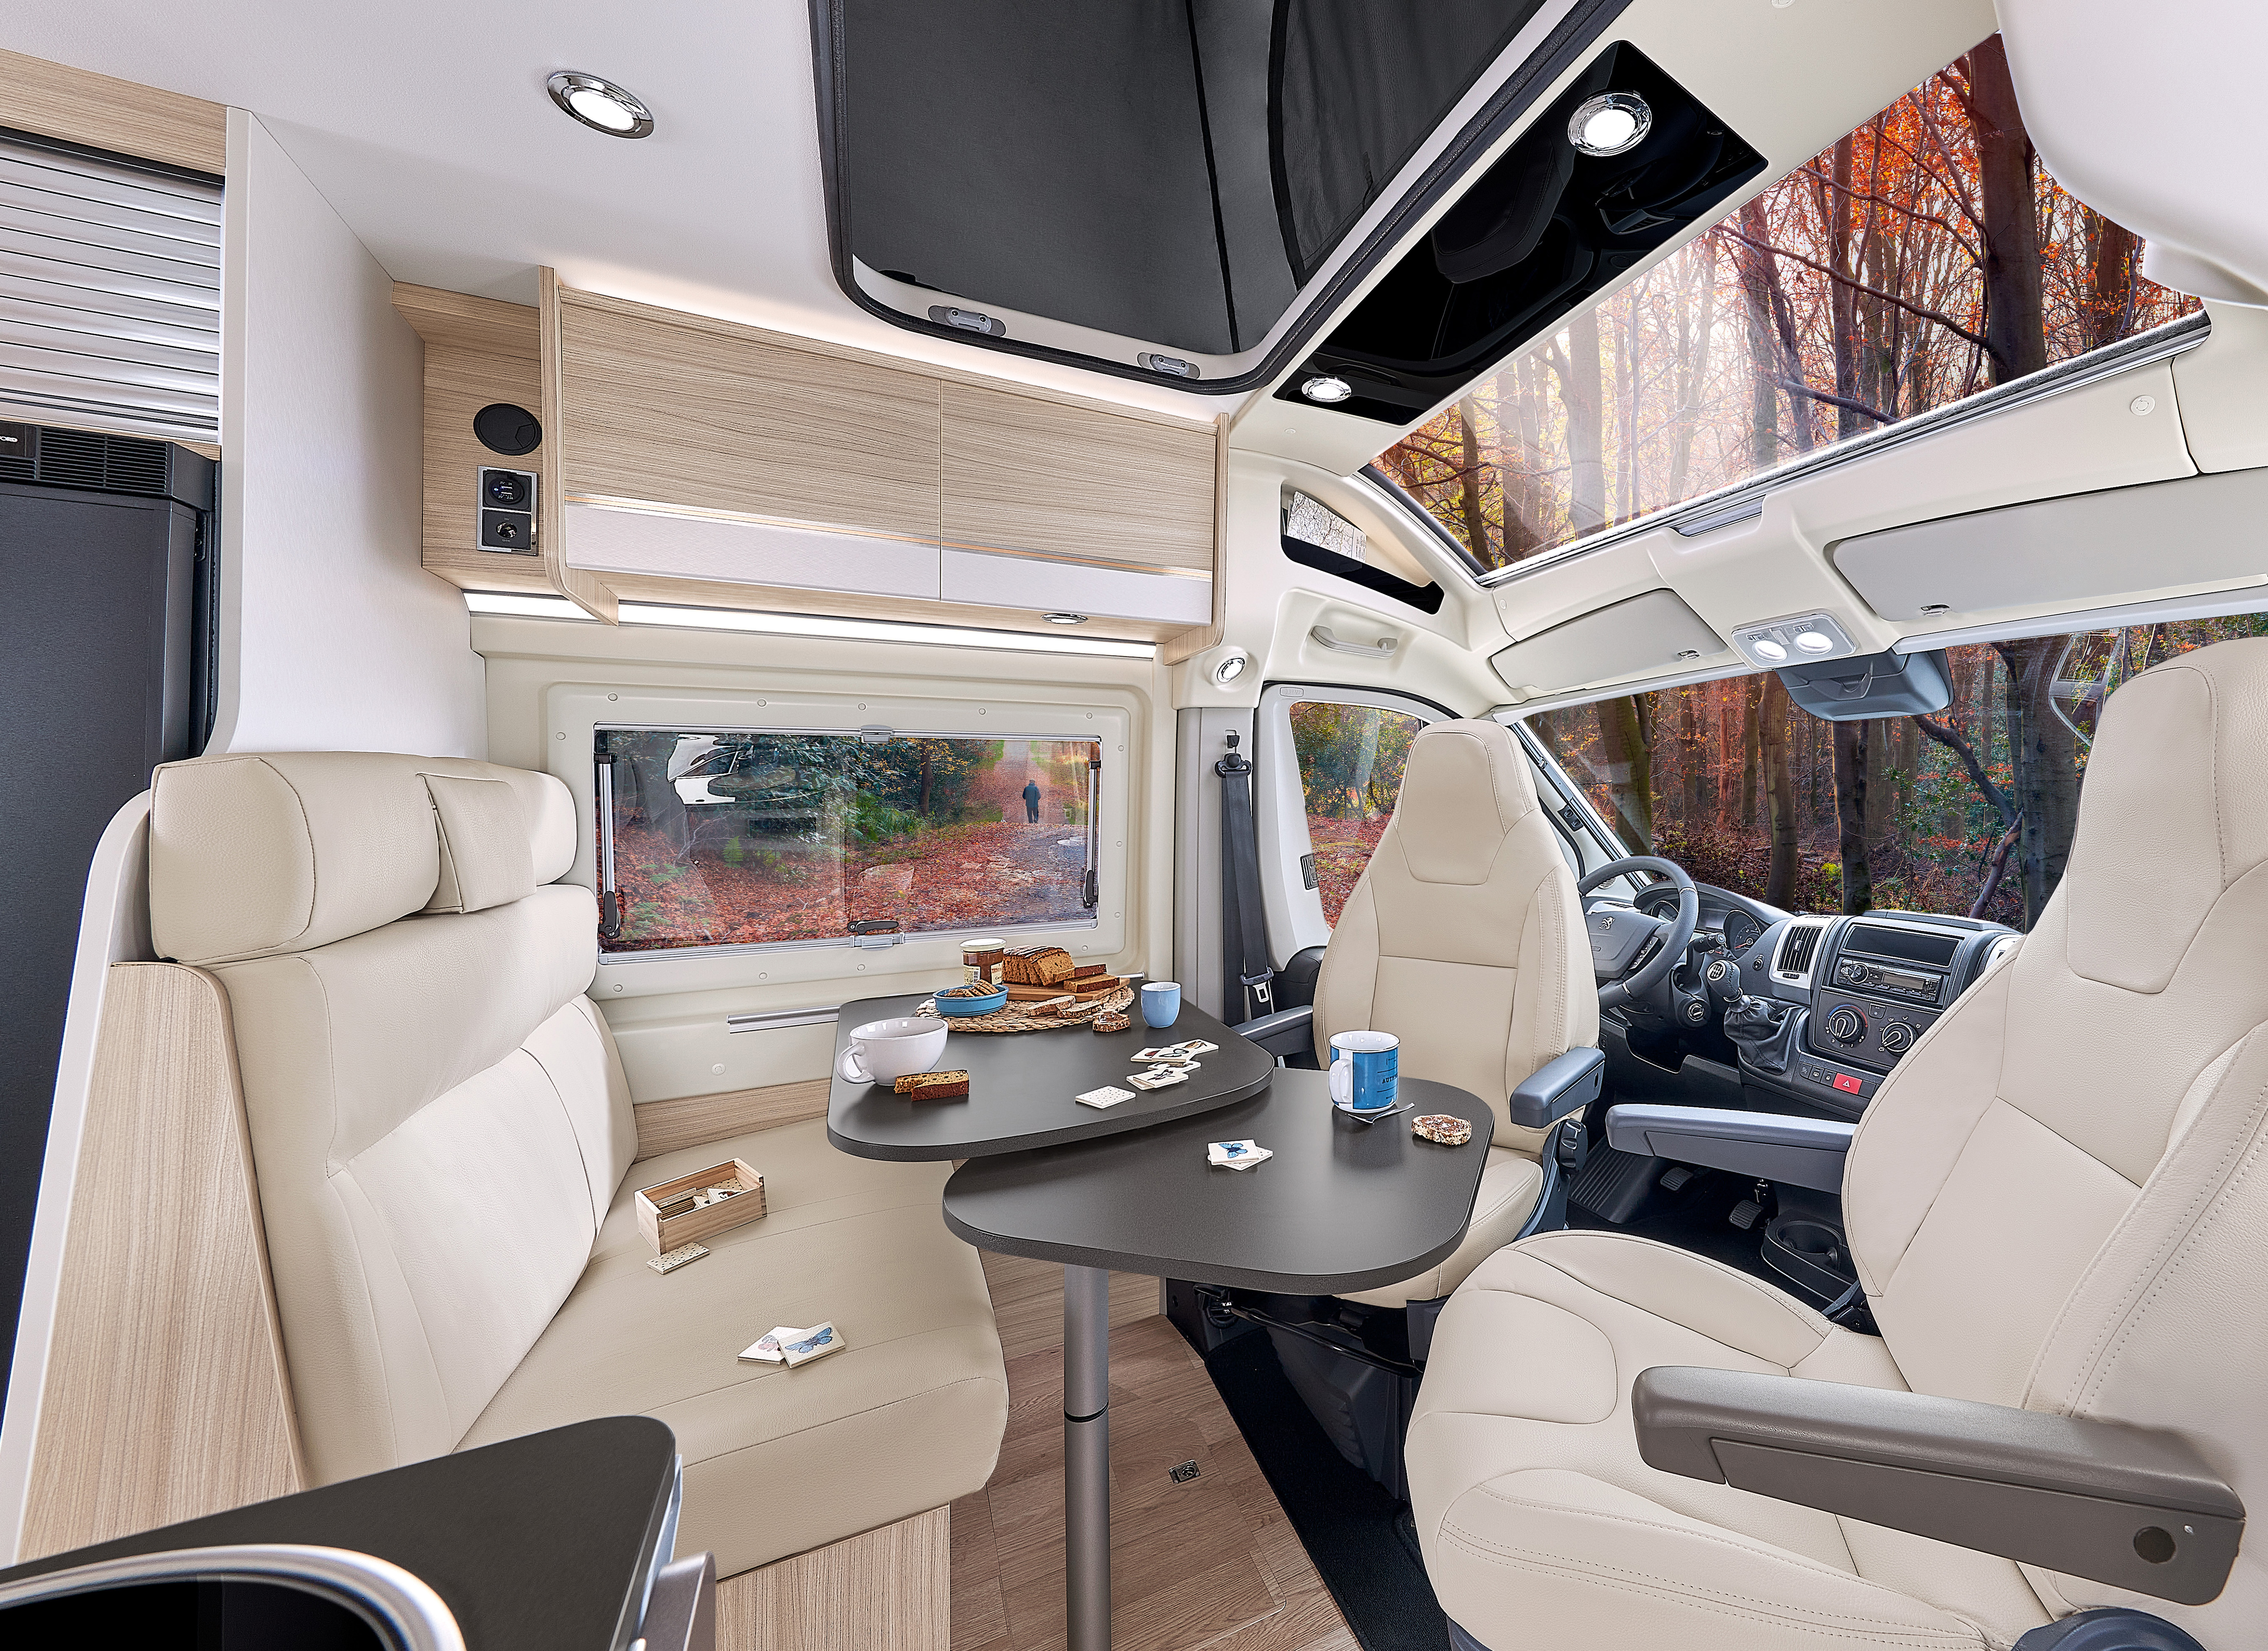 Dreamer D55UP - a well-thought-out campervan for four – image 1